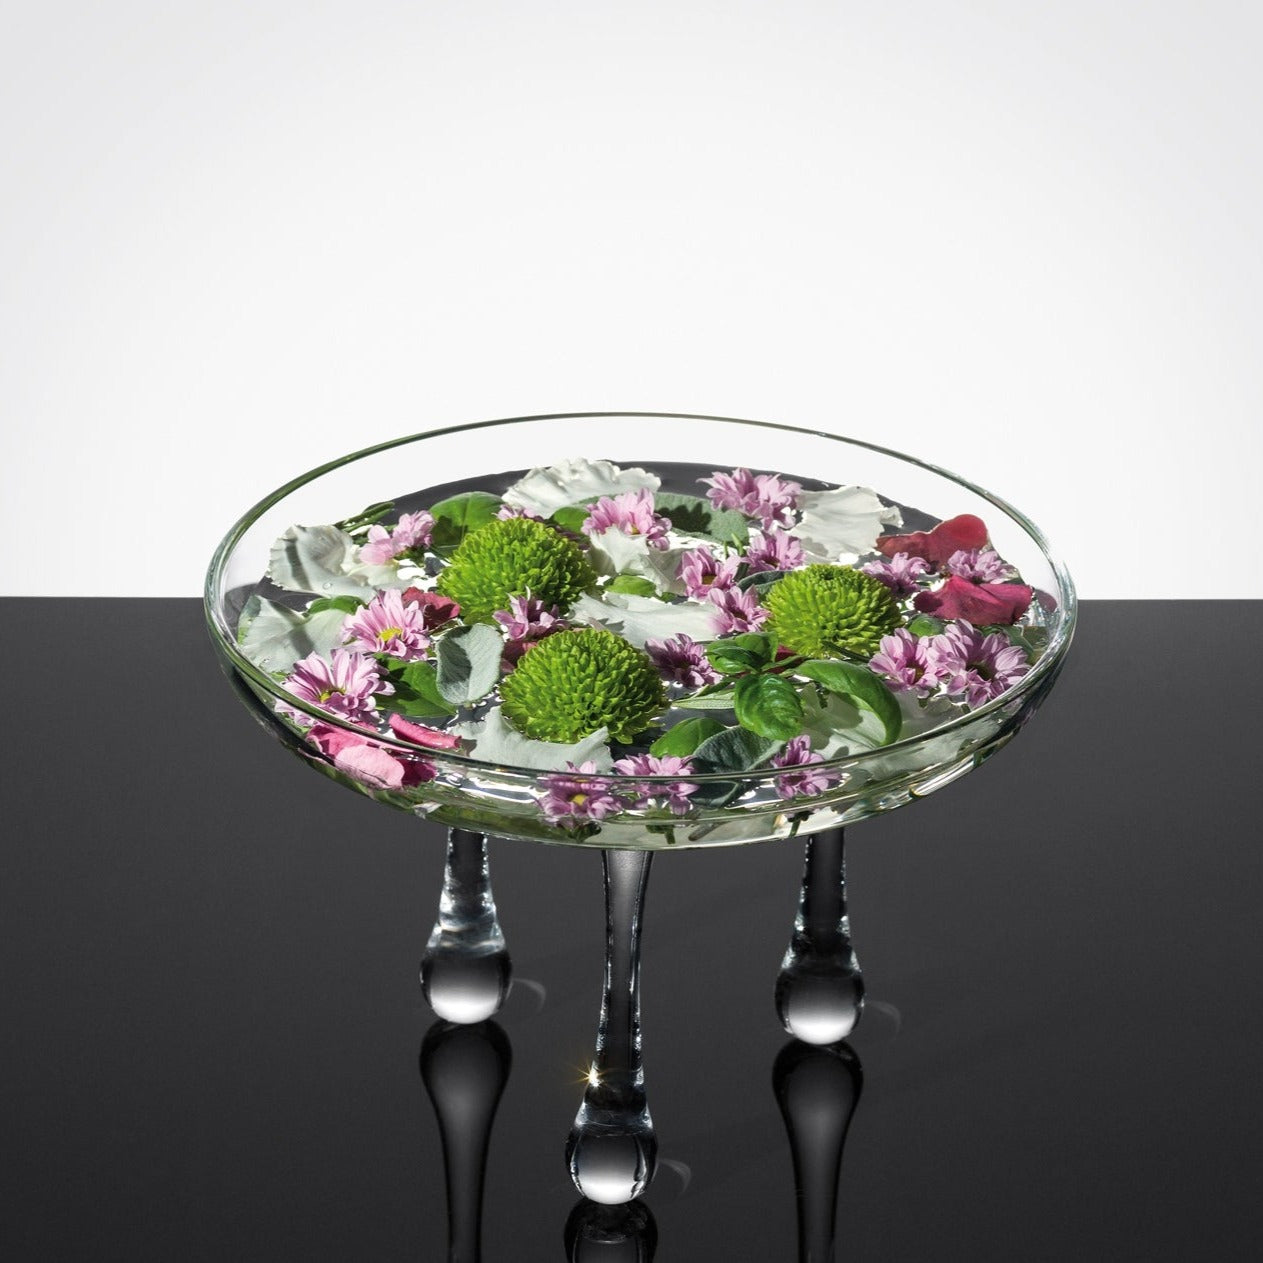 Agilla, serving stand in glass